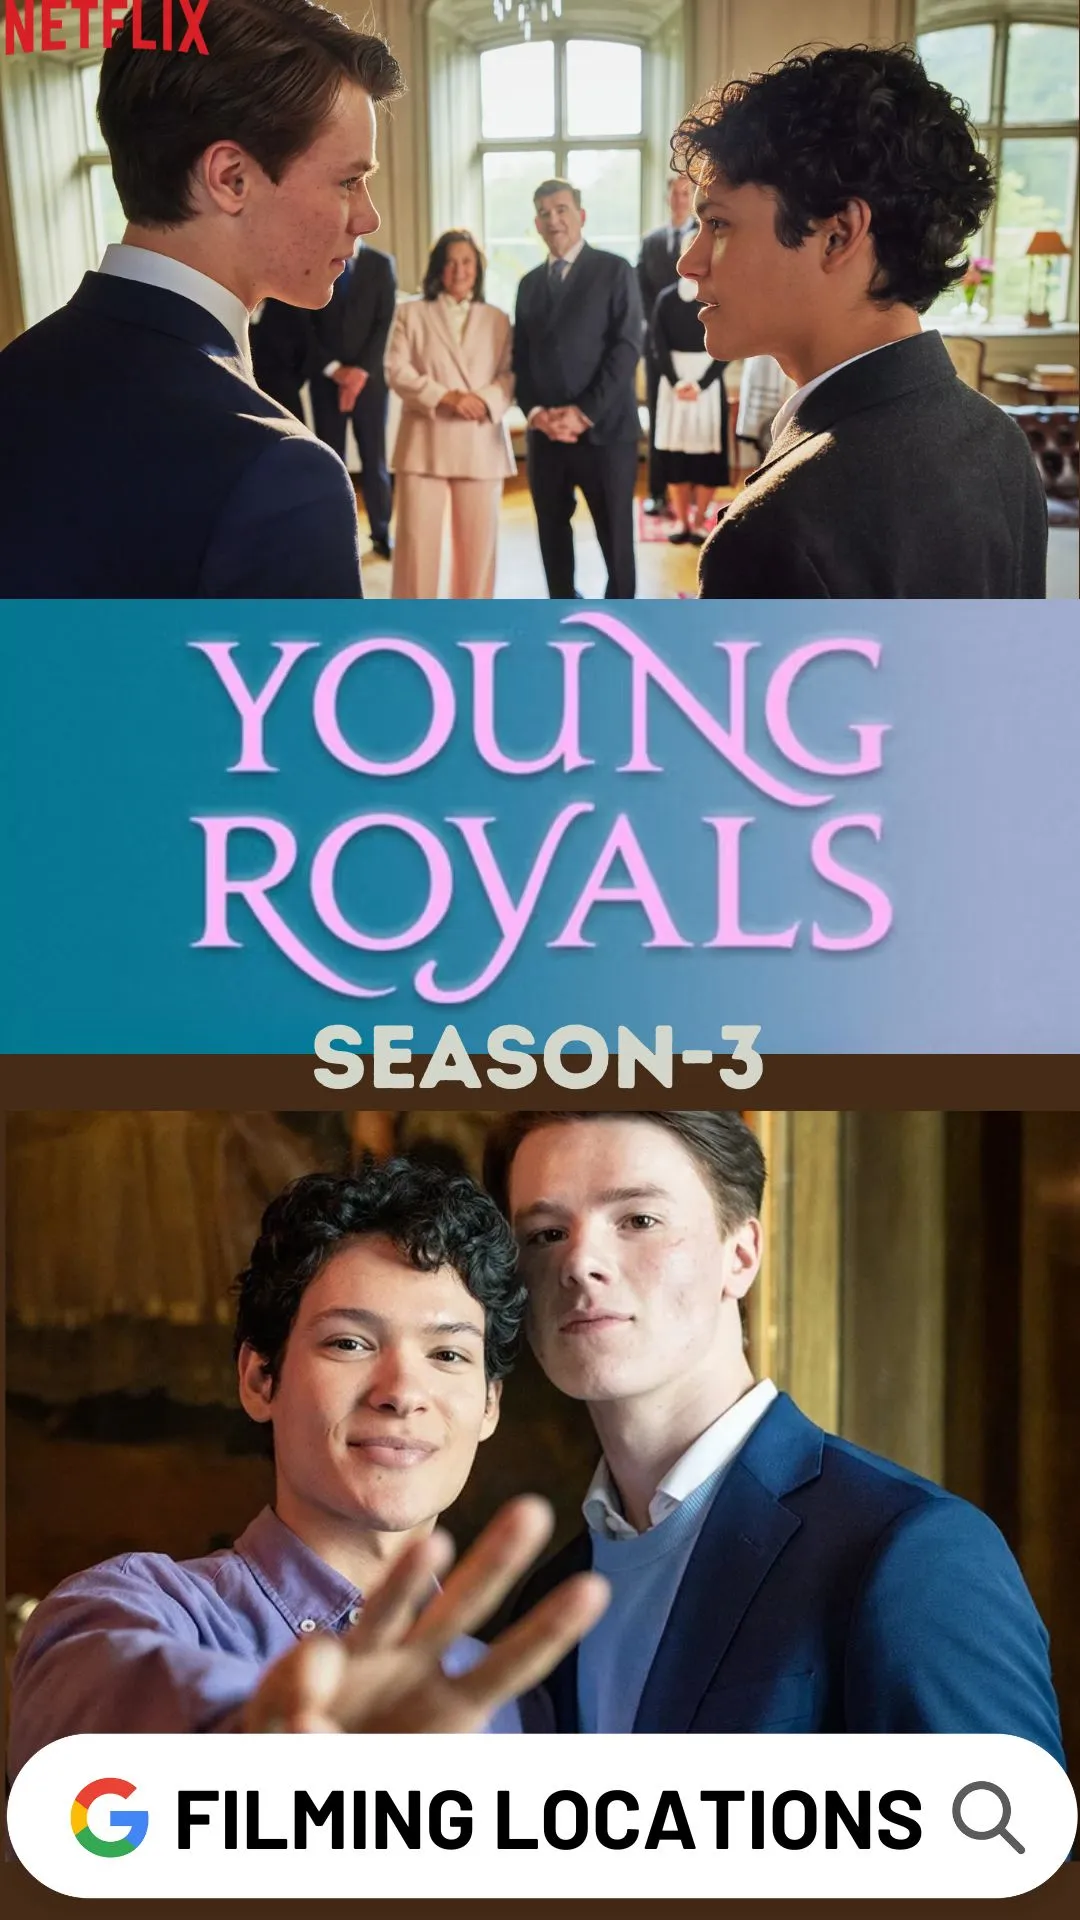 Where Is Young Royals Season 3 Filmed